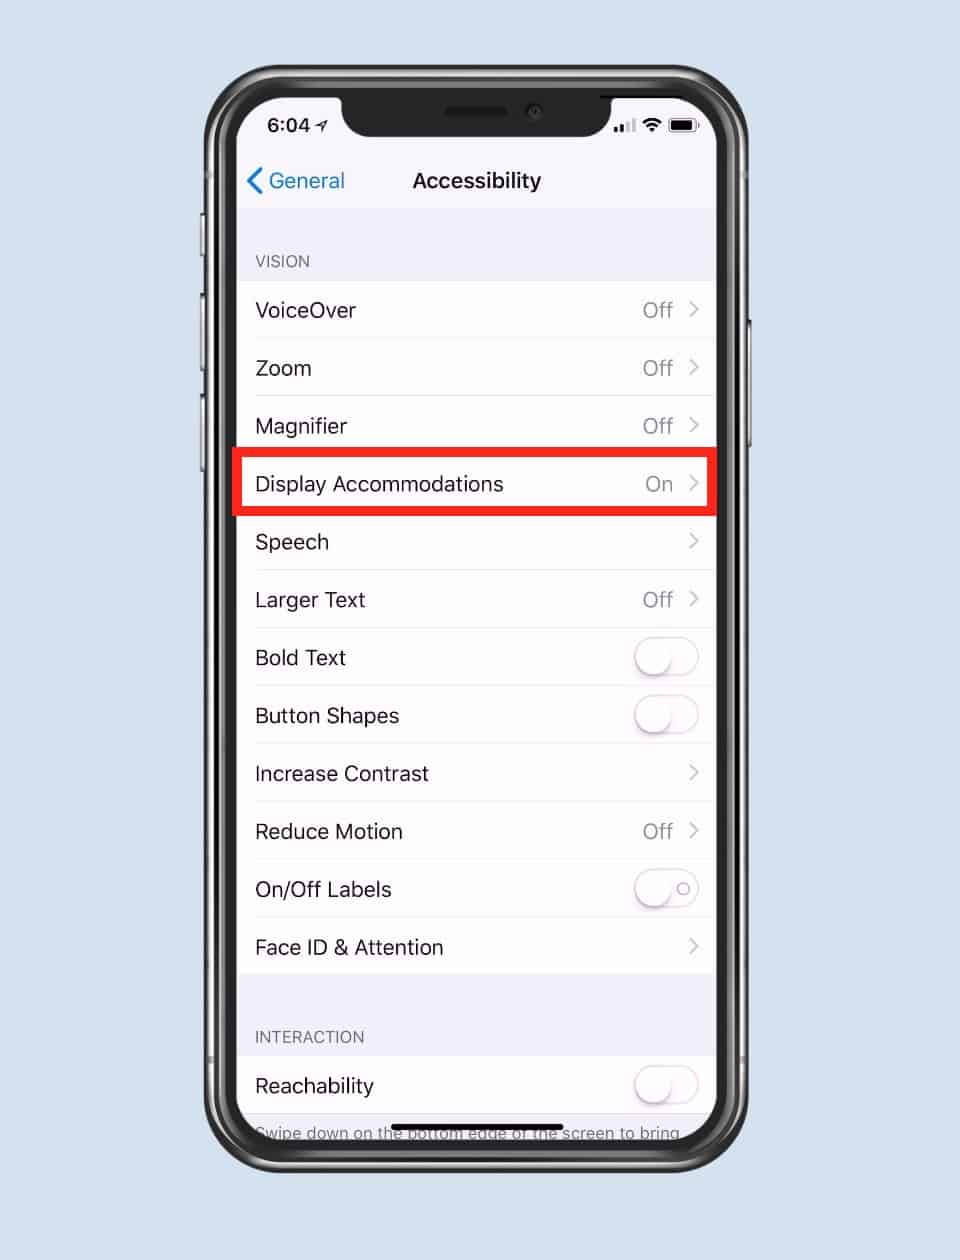 "Display Accommodations" Option on iPhone